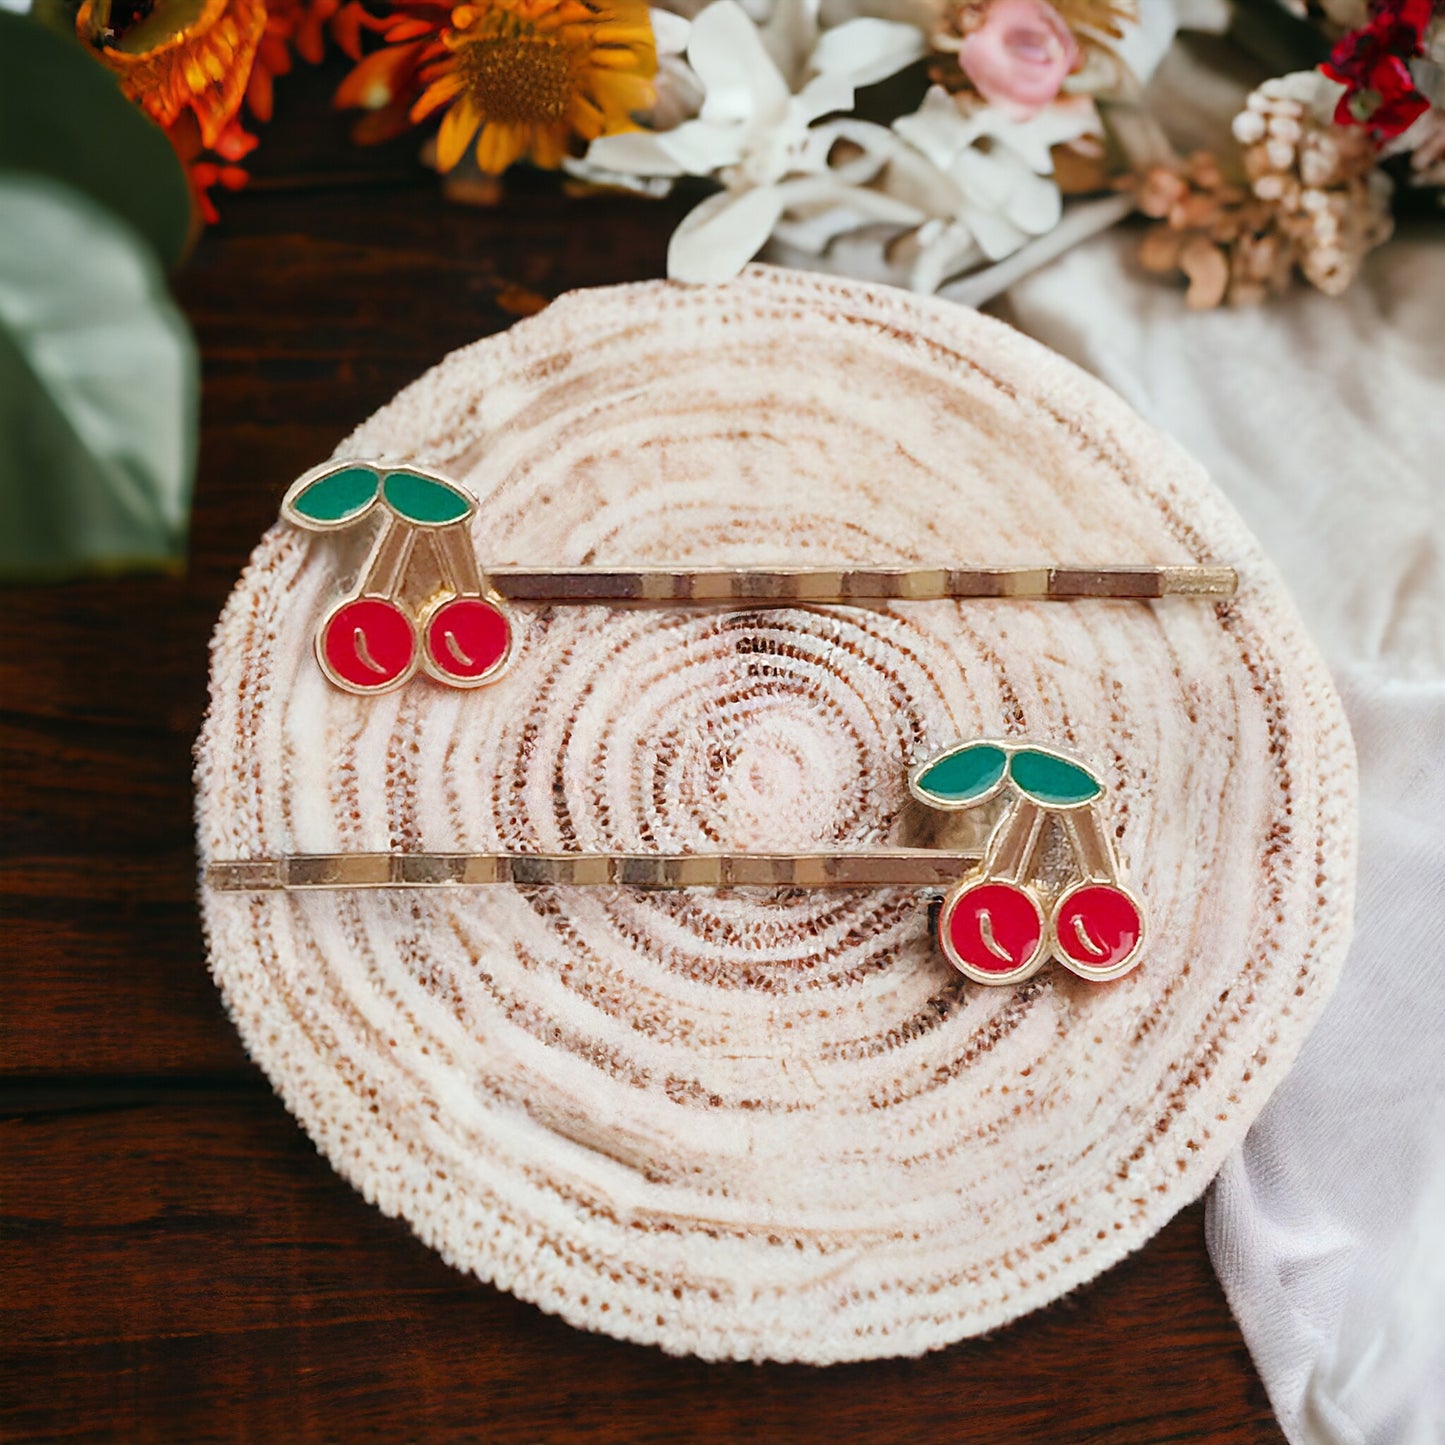 Enamel Cherry Bobby Pins: Sweet Accessories for Fun & Flirty Hairstyles